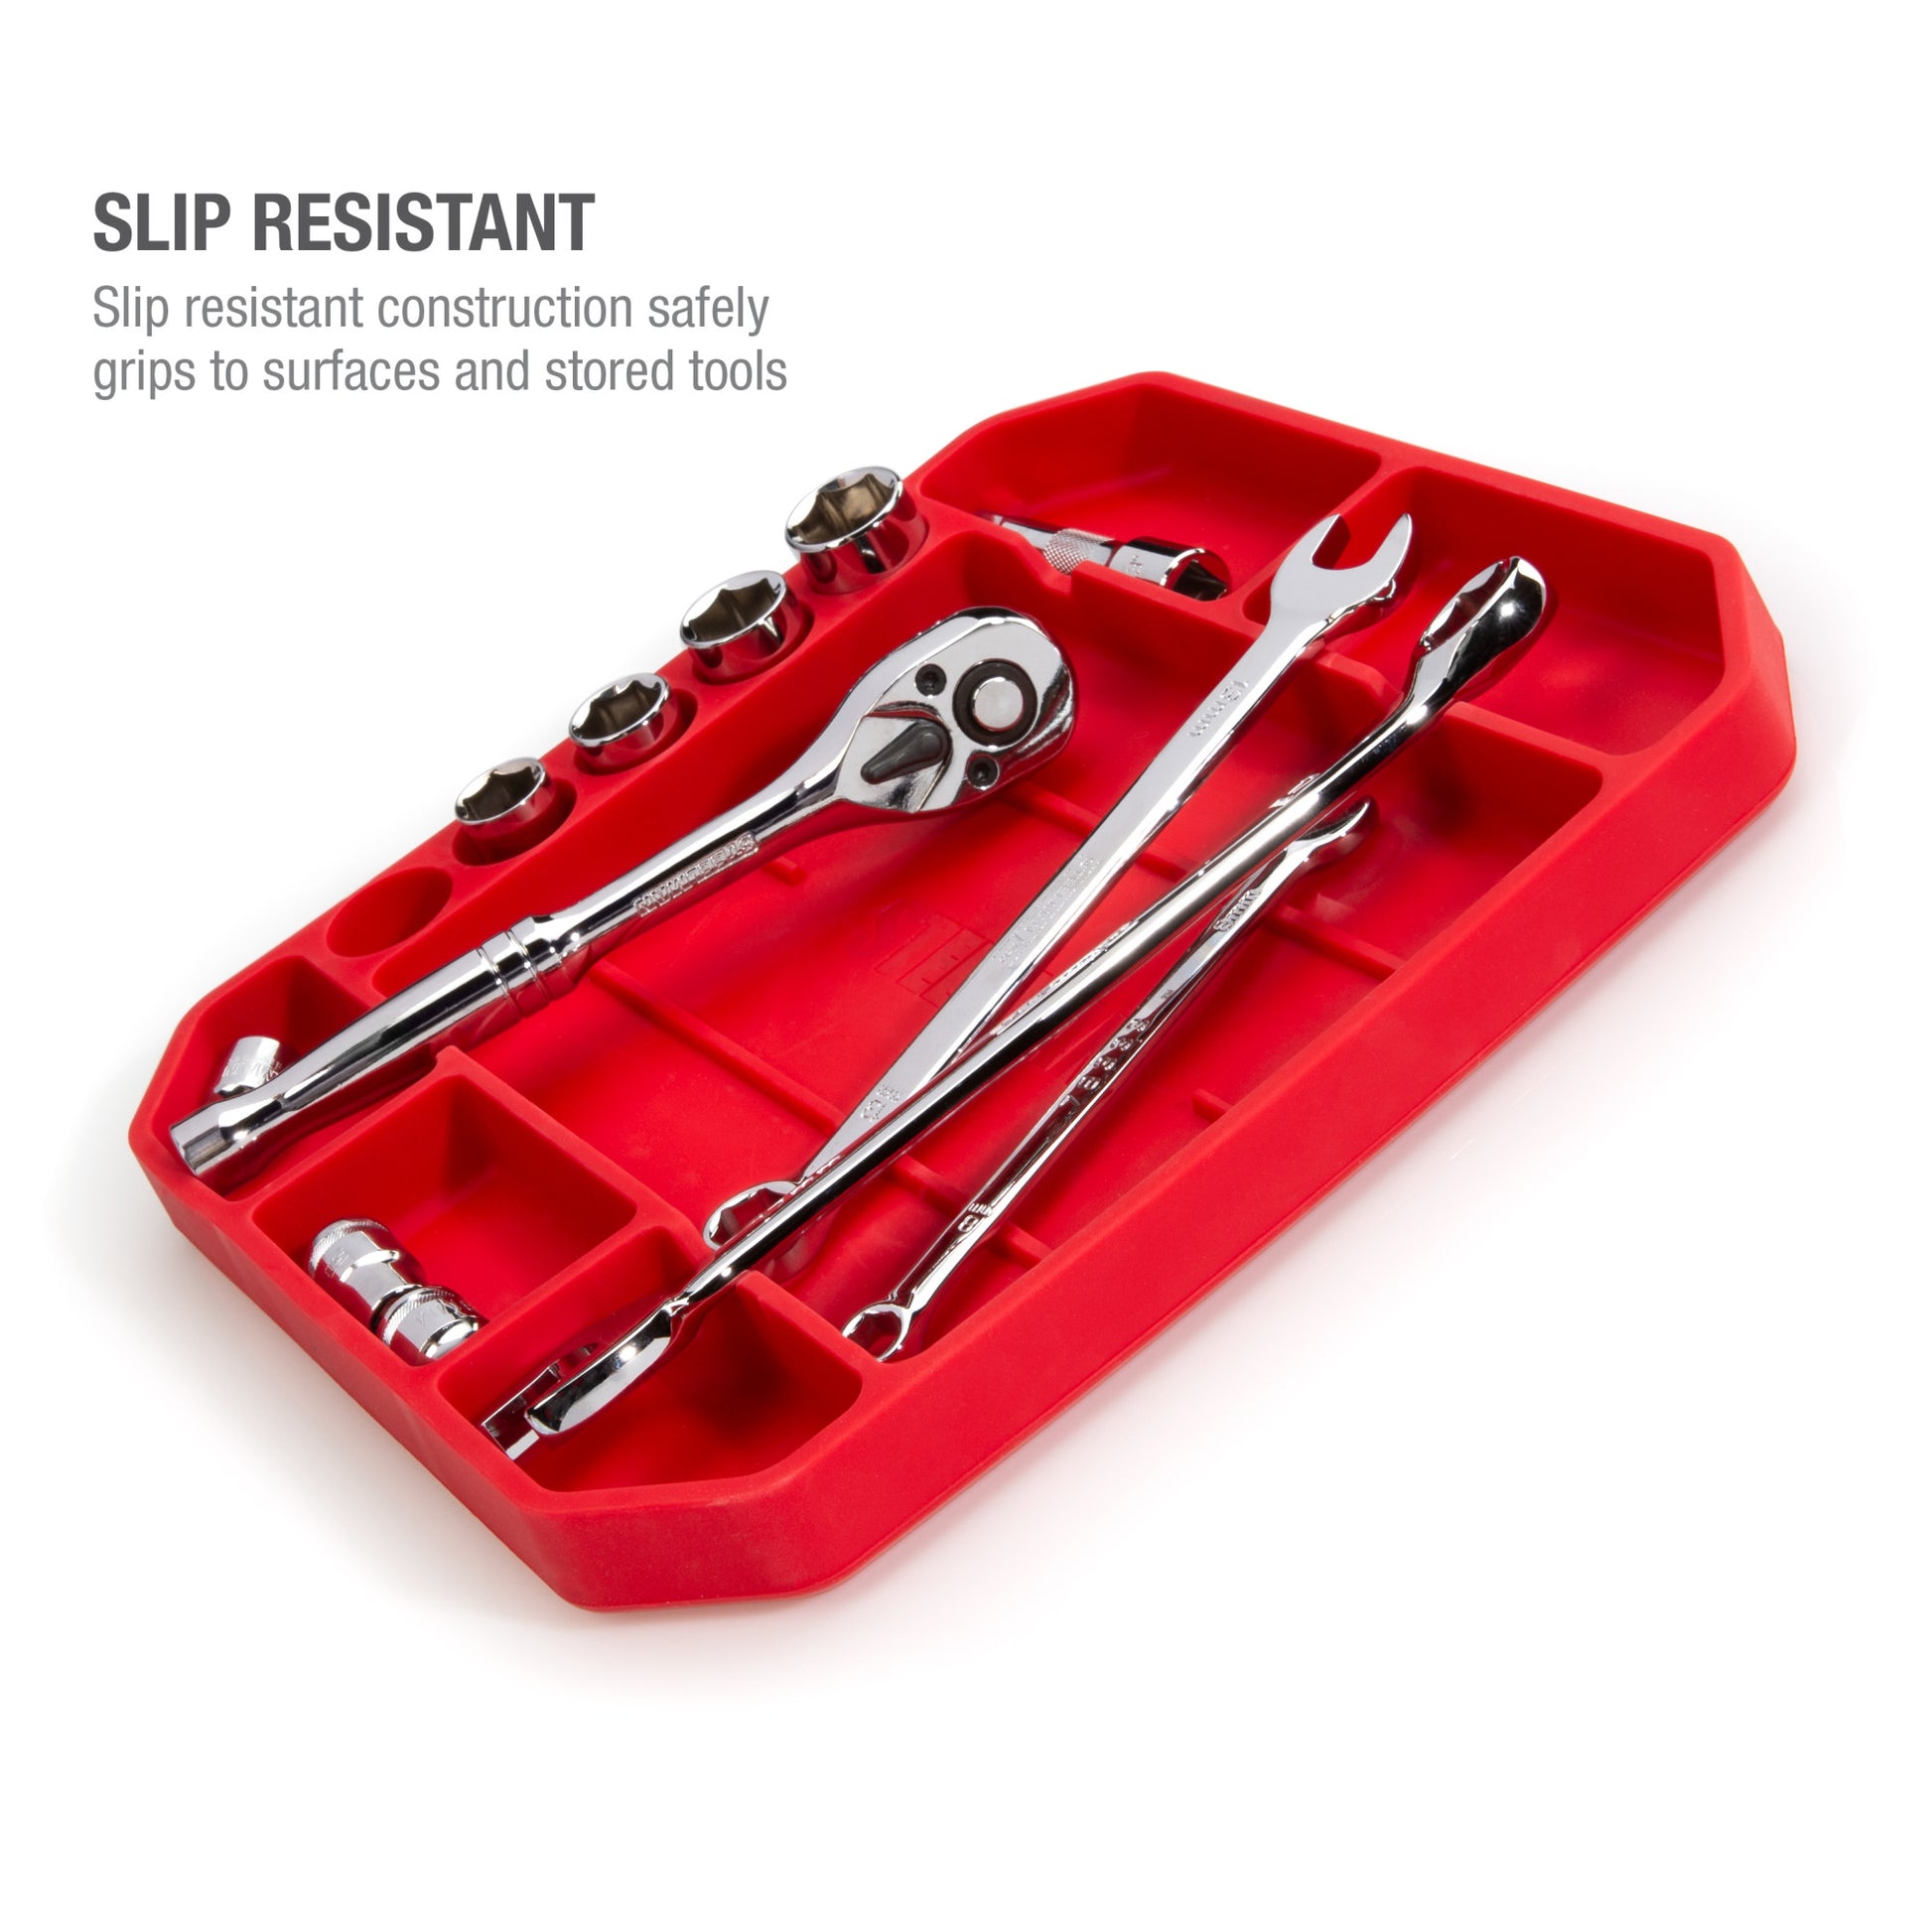 Tool Tray Silicone 3 Piece Set Color Red S&B